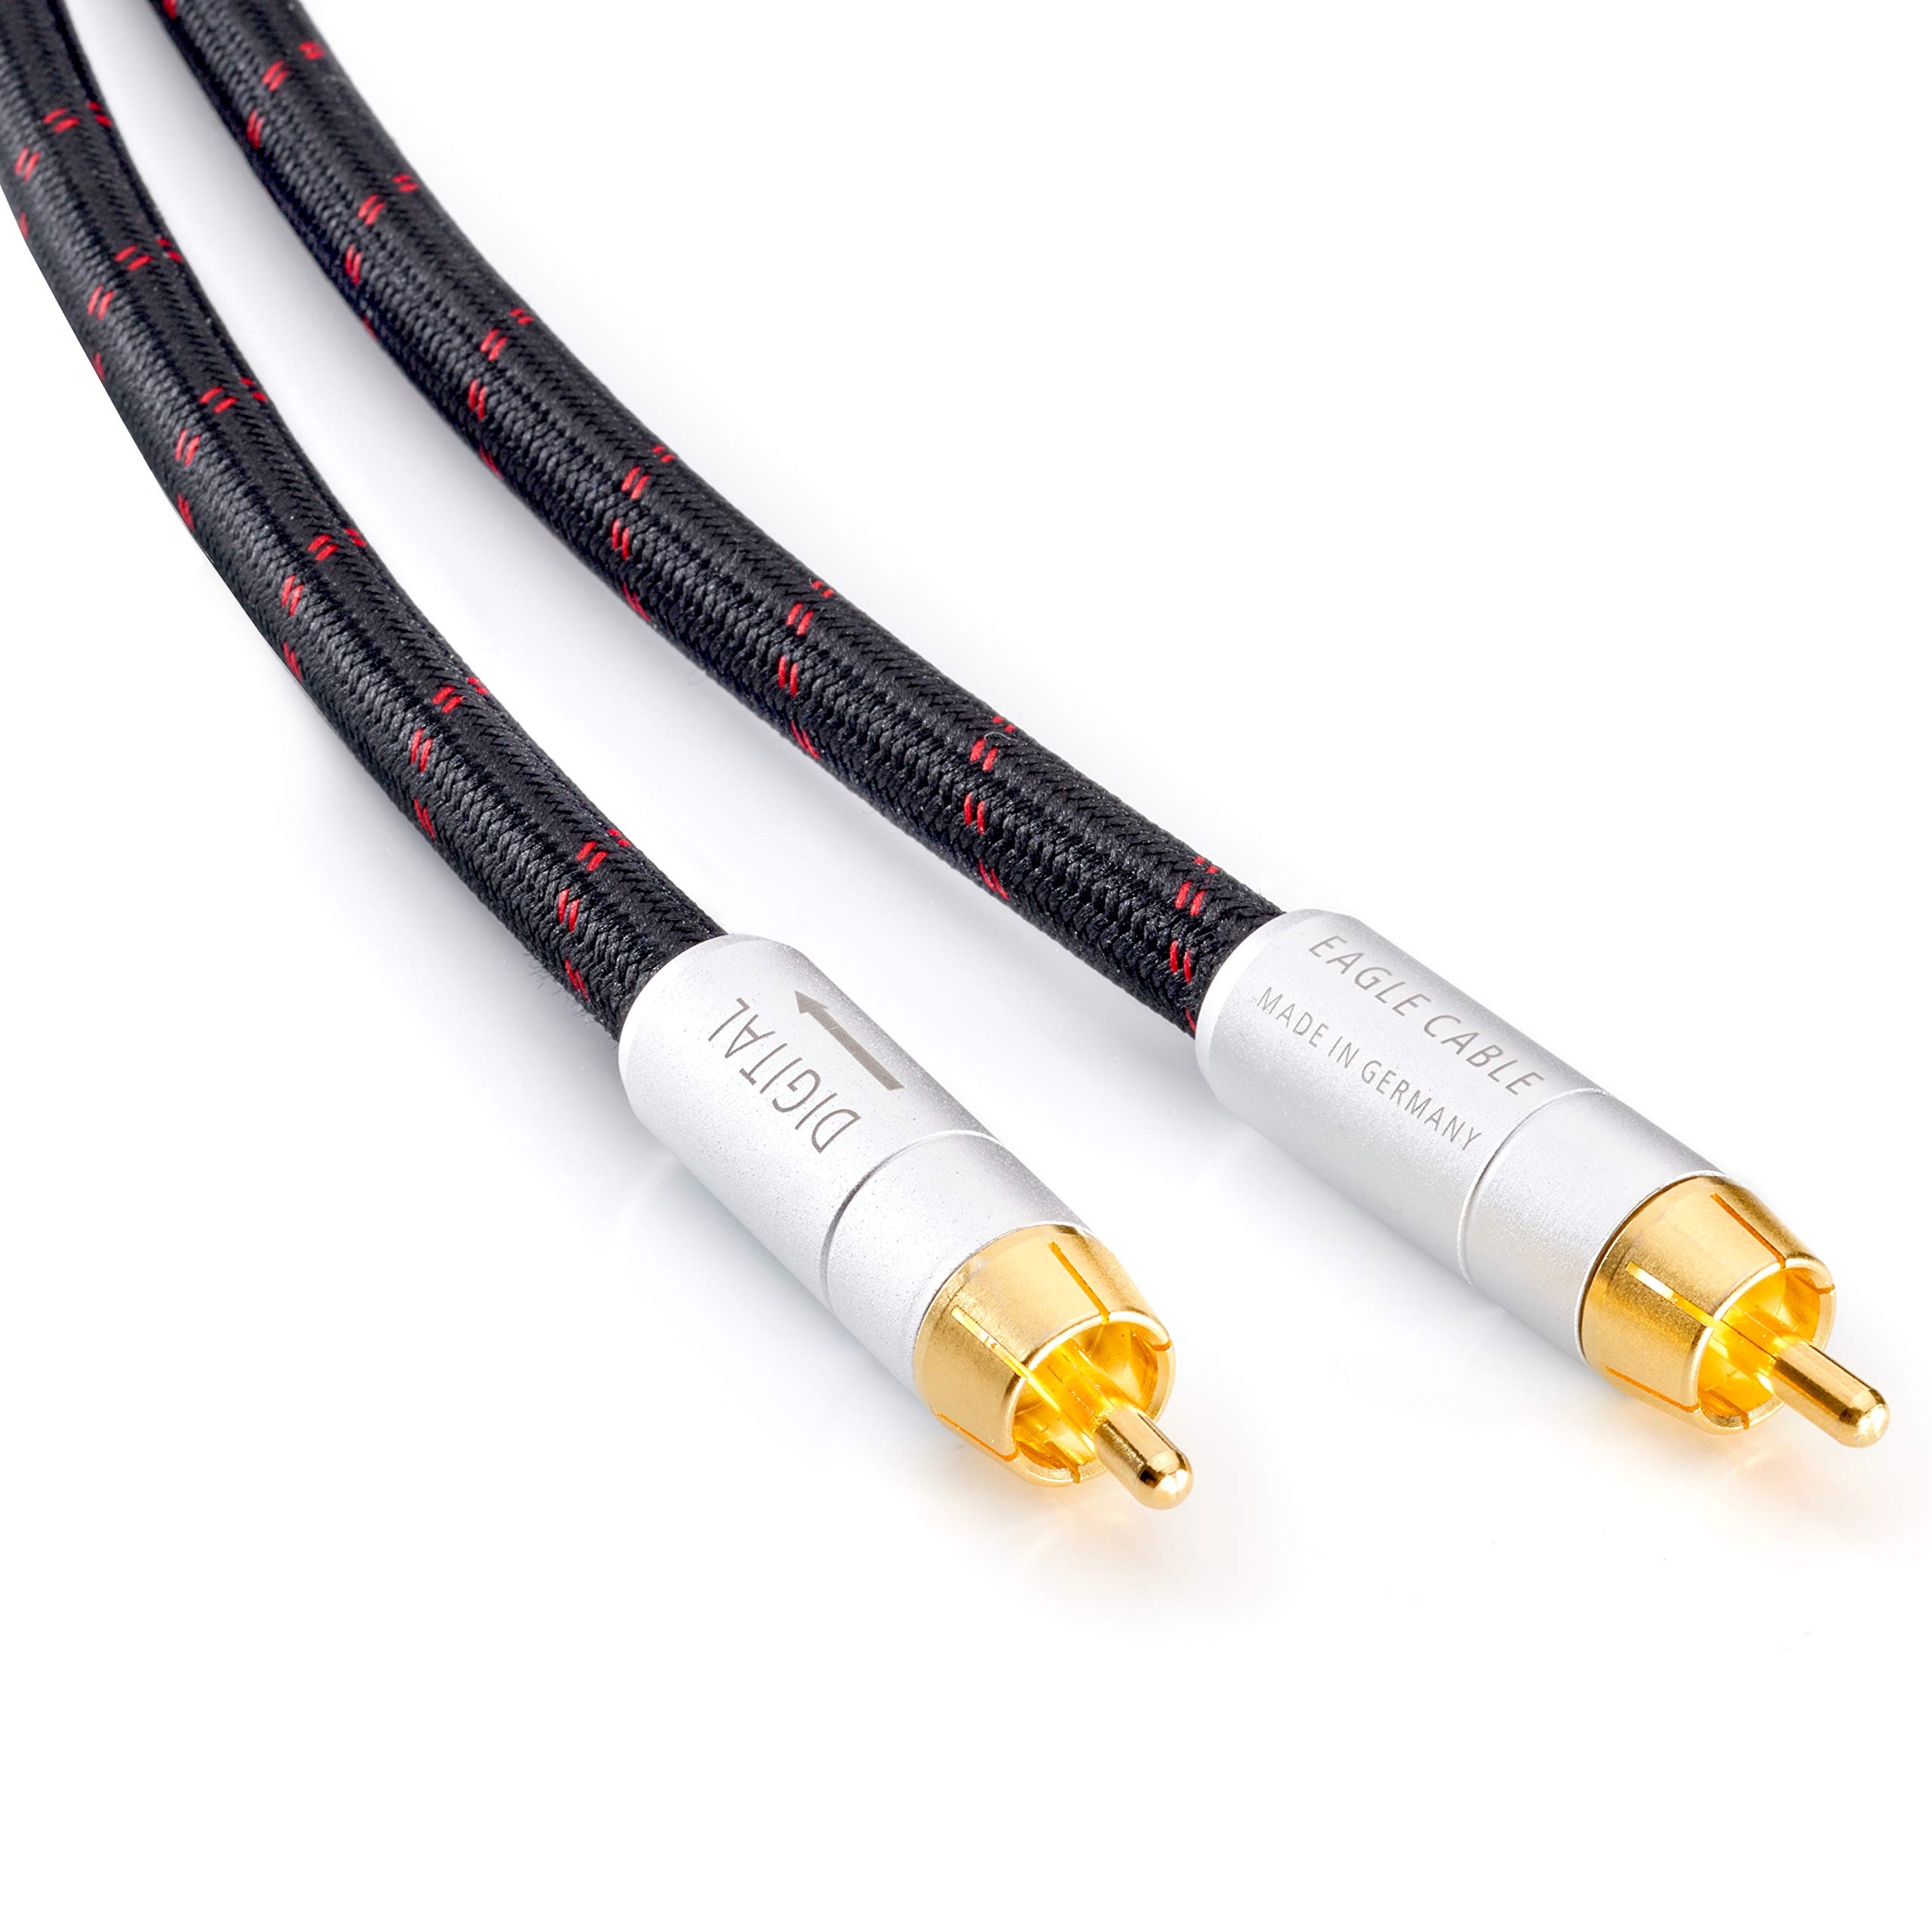 Eagle Cable by INAKUSTIK – 31370107 – High End Deluxe Digitalkabel | 0,75m | S/PDIF Koaxialkabel | 75 Ohm - Geringer Jitter | Made in Germany | Massiver OFC-Leiter | 4-fache Schirmung